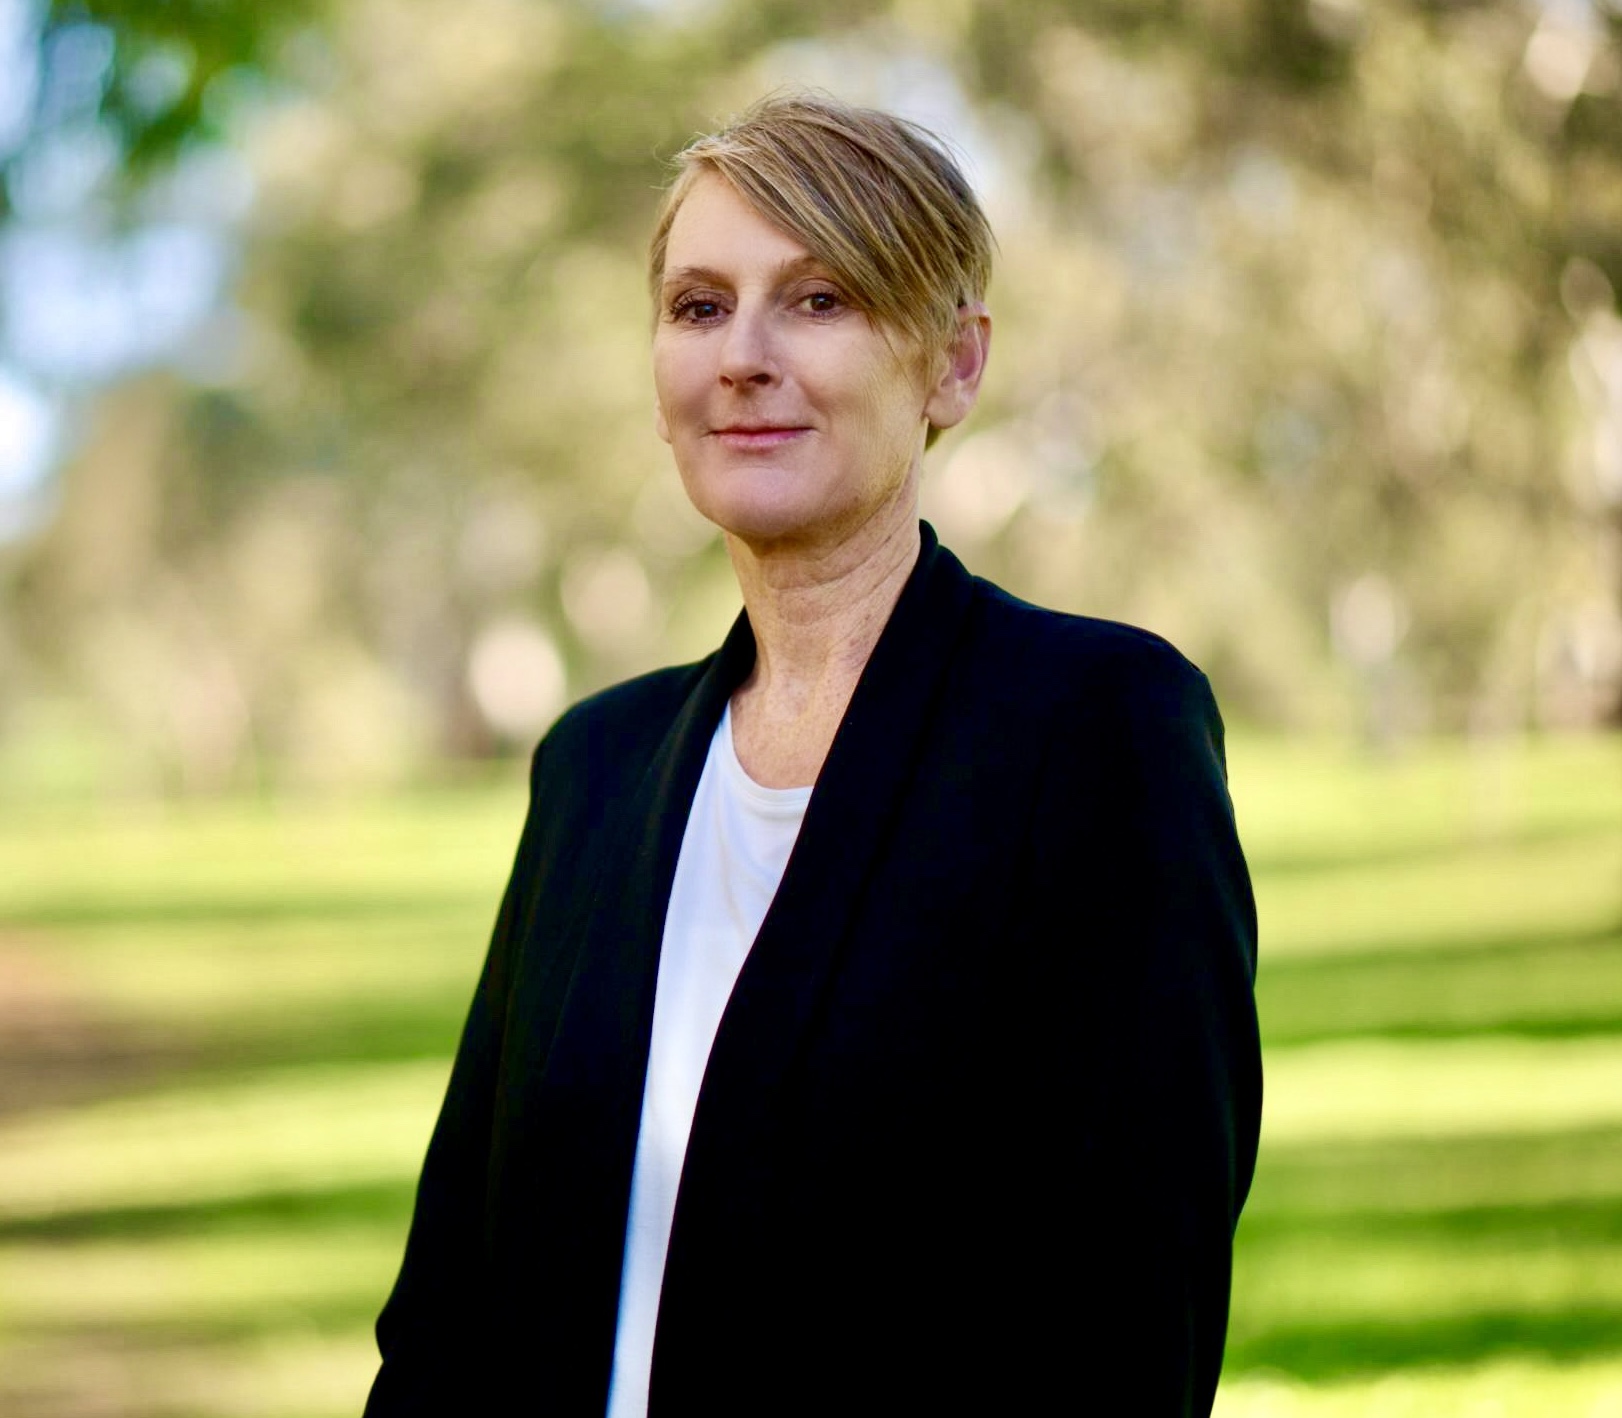 A woman with short blonde hair, a black blazer and white shirt in a leafy park.